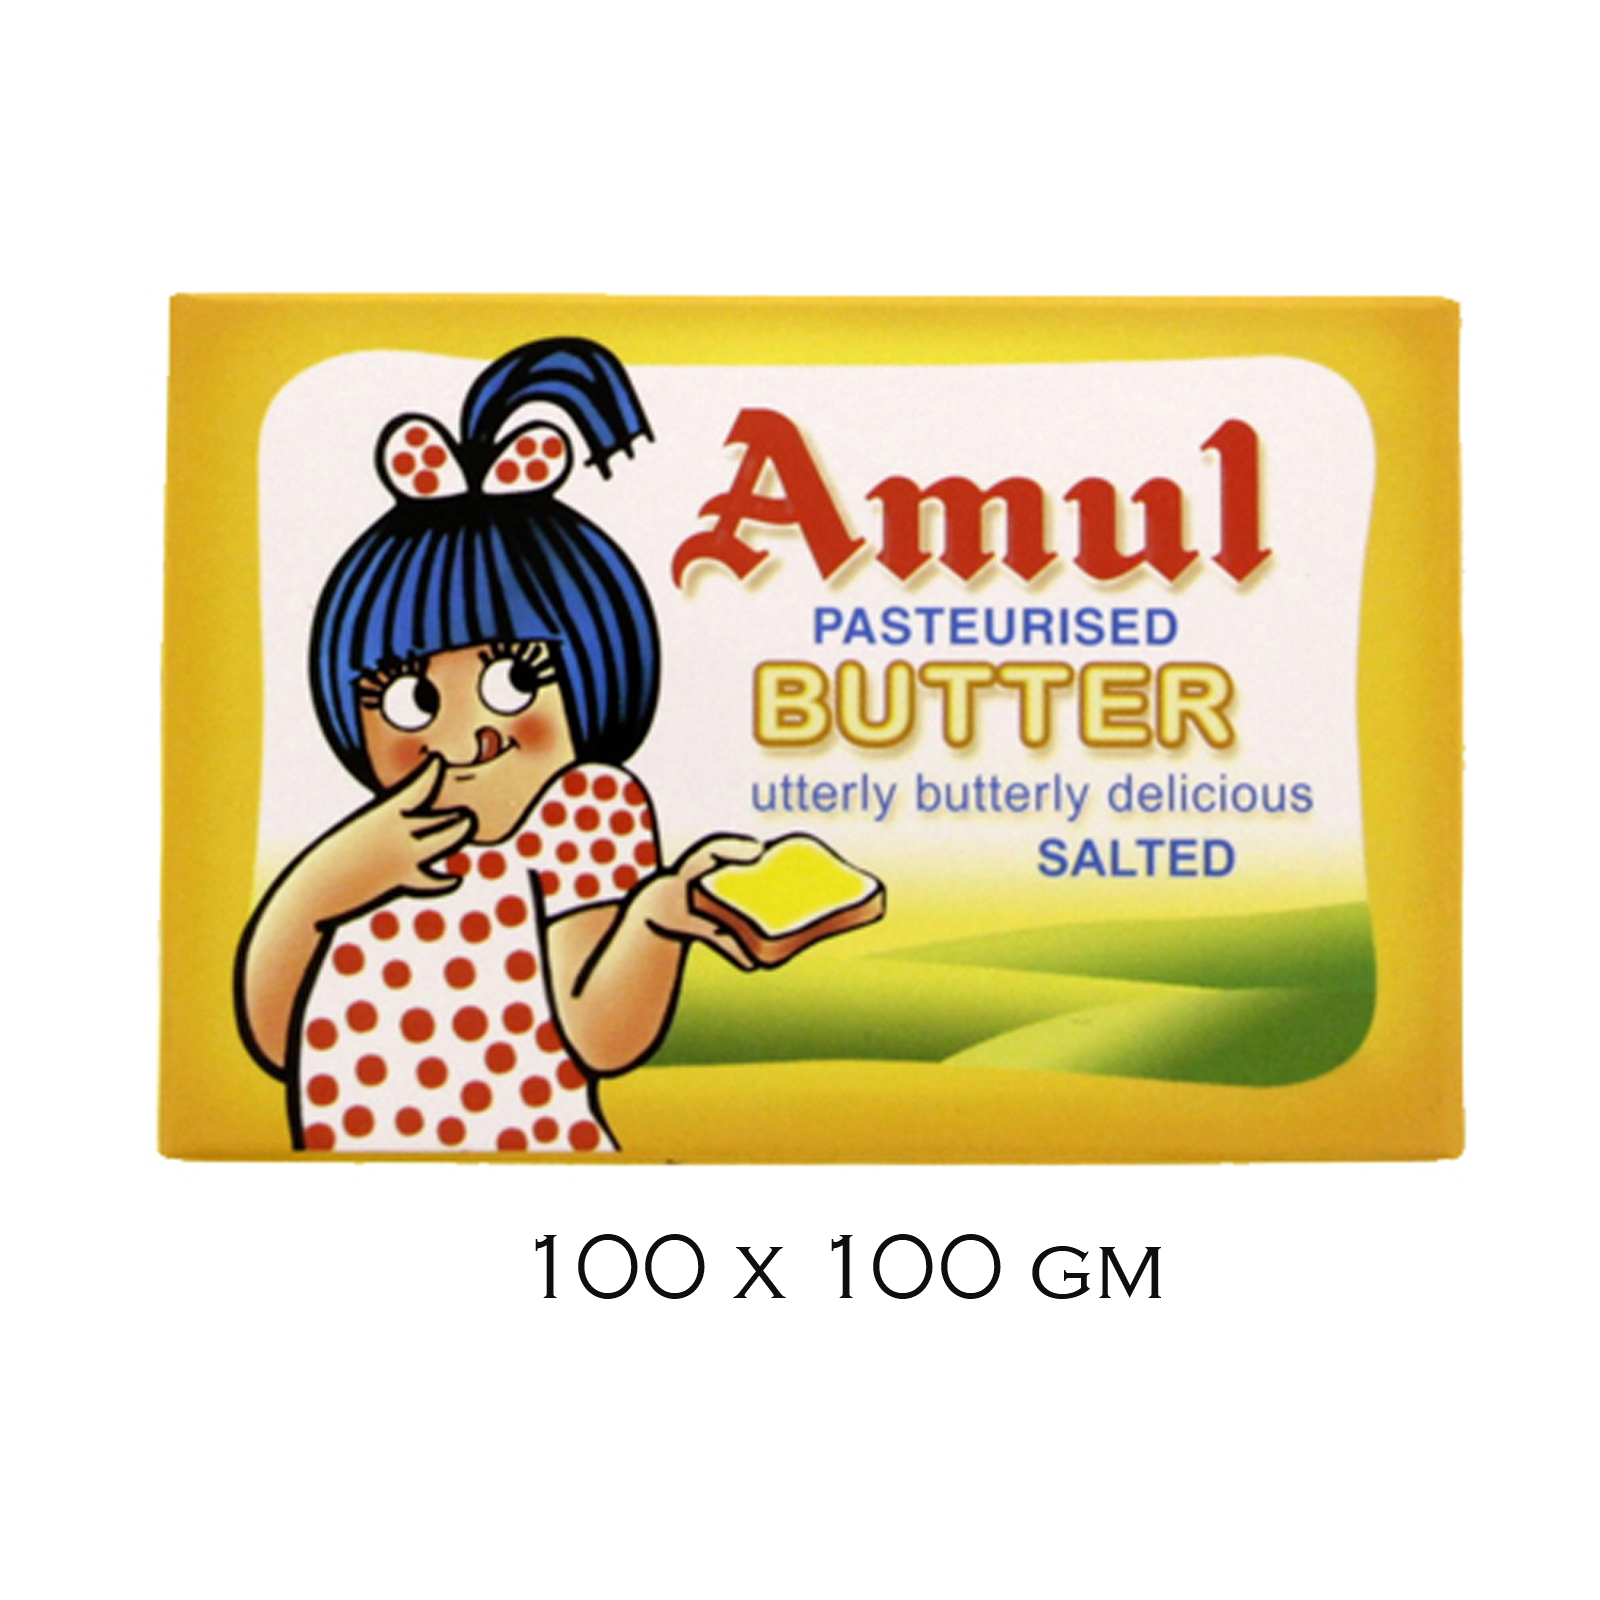 BUTTER SALTED AMUL ( 100 X 100 GM)